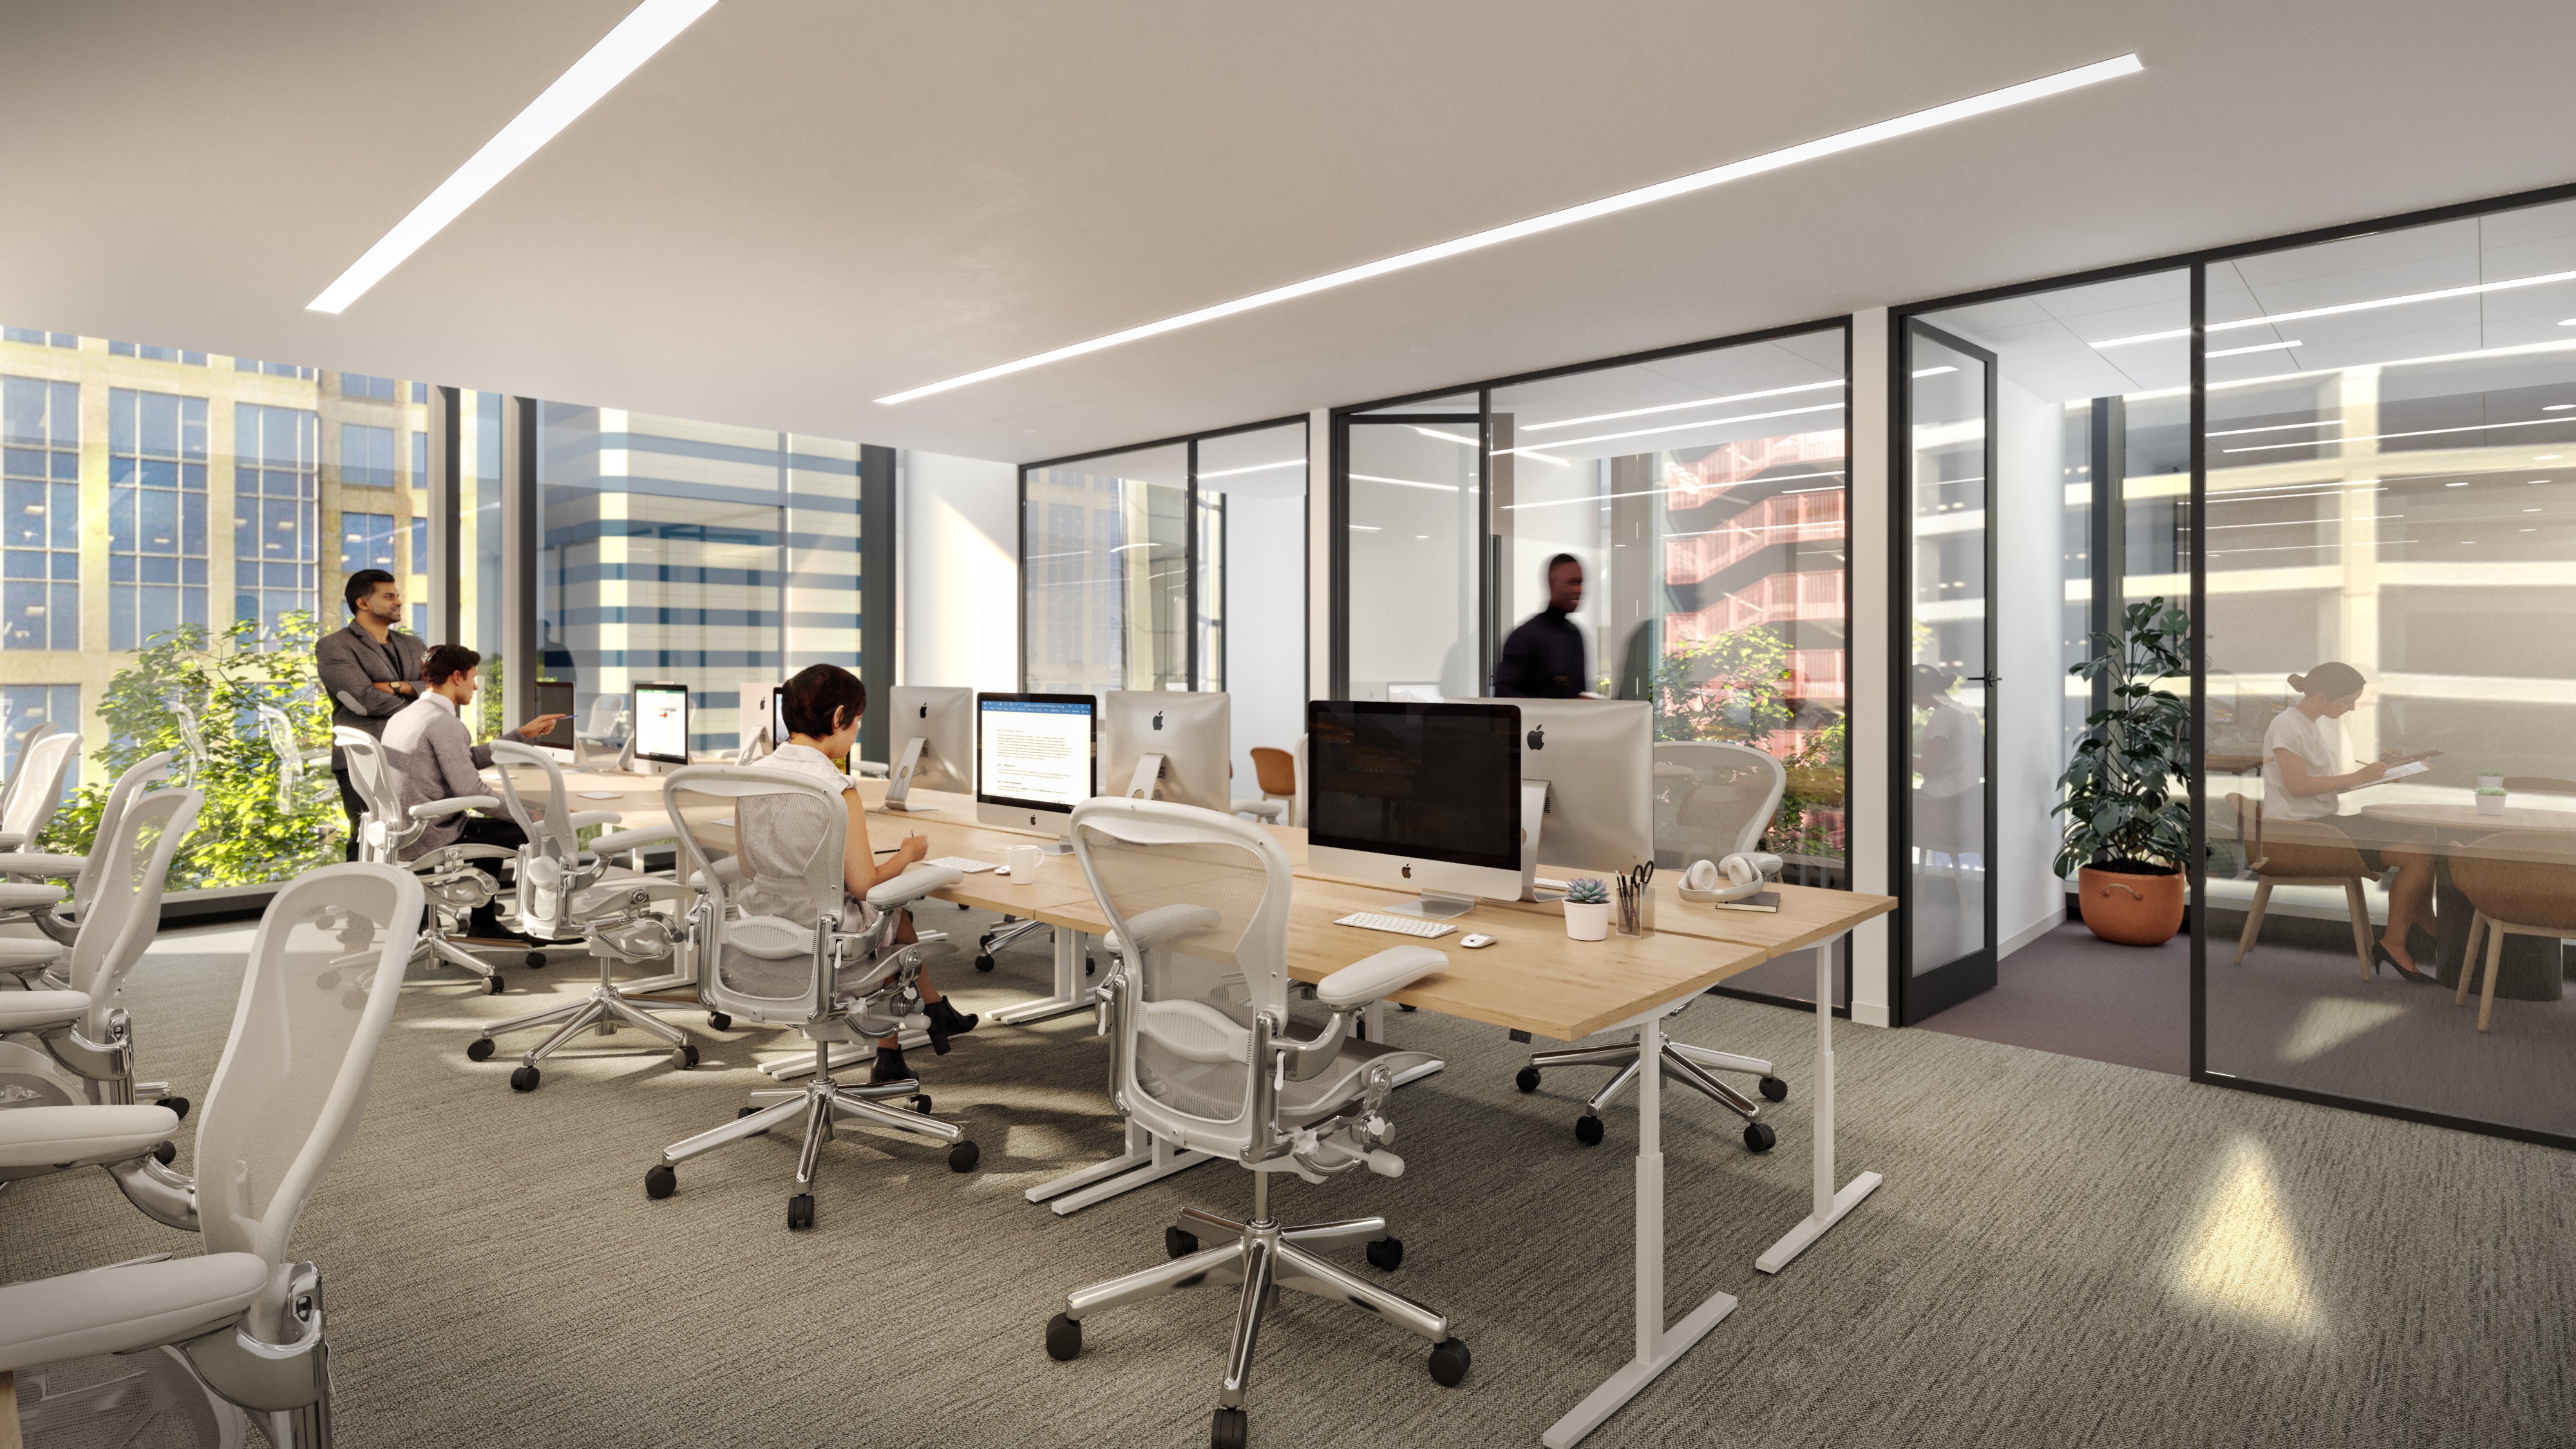 12 Things to Consider When Looking for Office Space in 2022